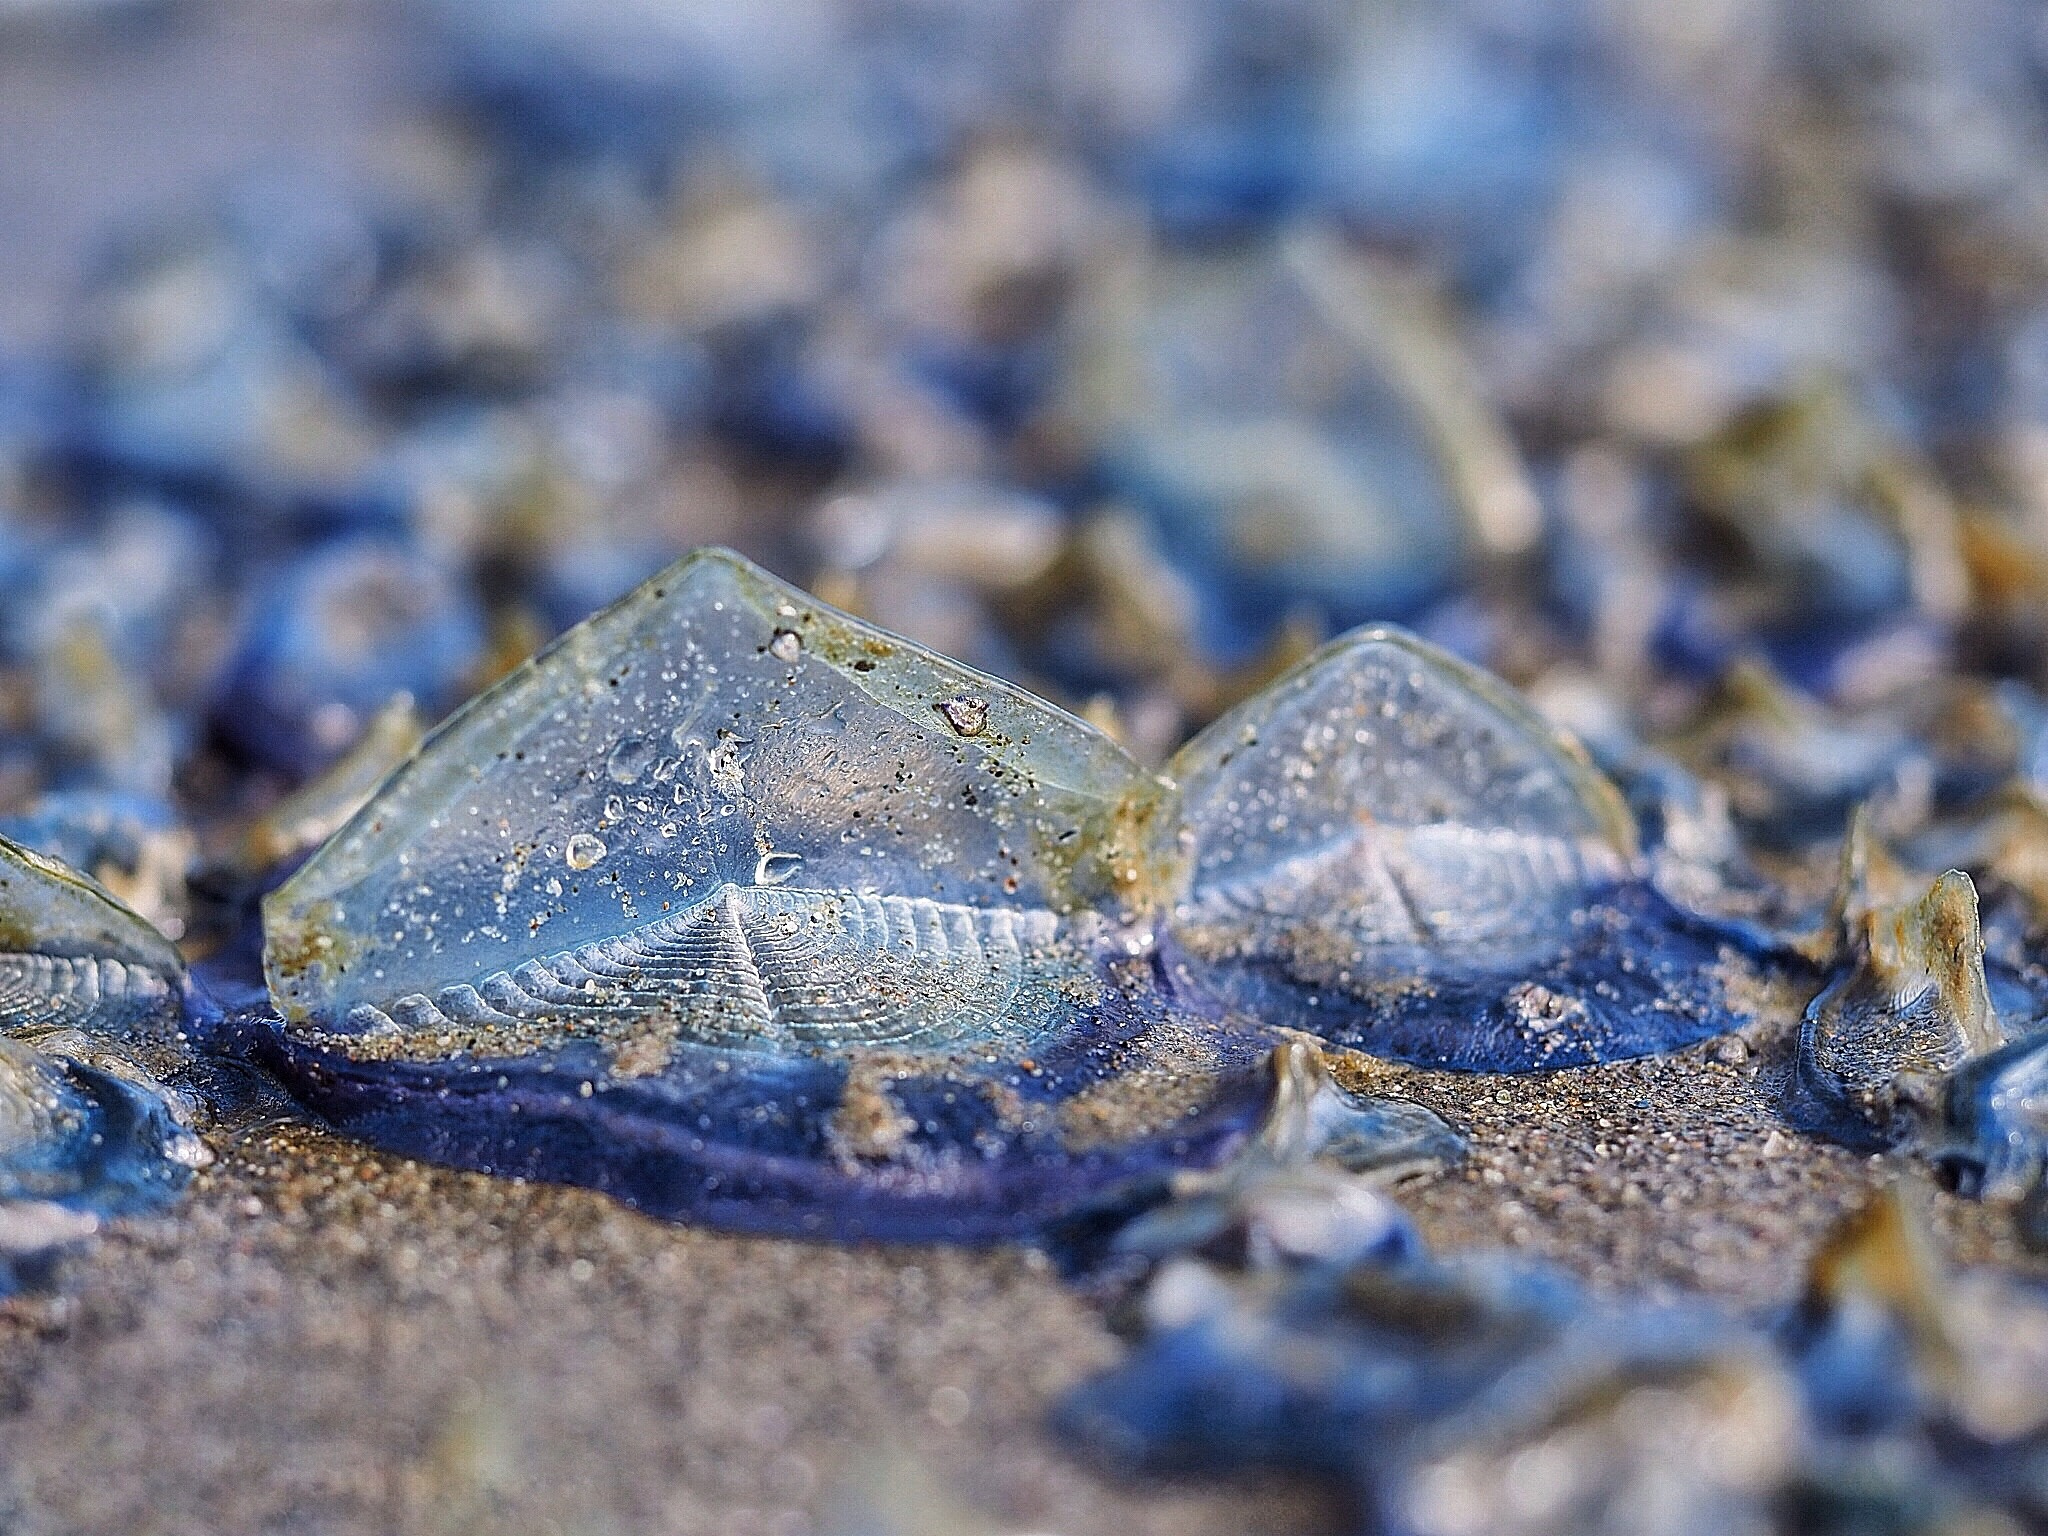 Dozens of light blue, translucent organisms comparable to jellyfish are washed ashore a sandy beach. Droplets of water and sand are sprinkled over the beings.